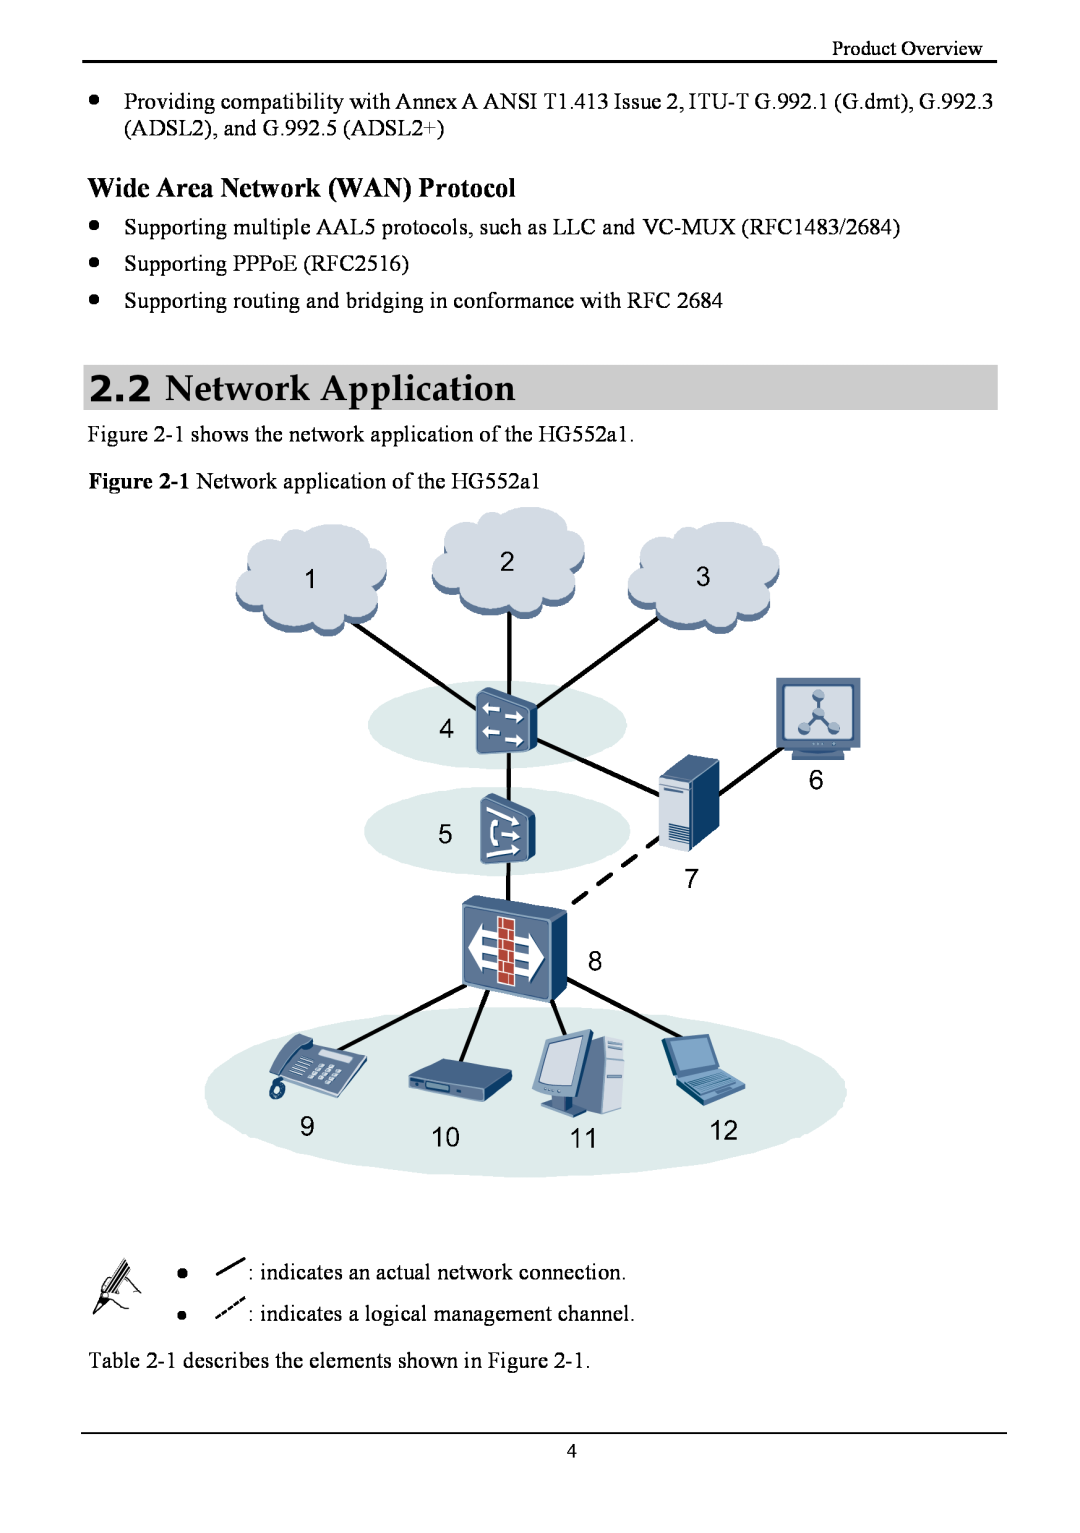 Huawei HG552a1 manual Network Application, Wide Area Network WAN Protocol 